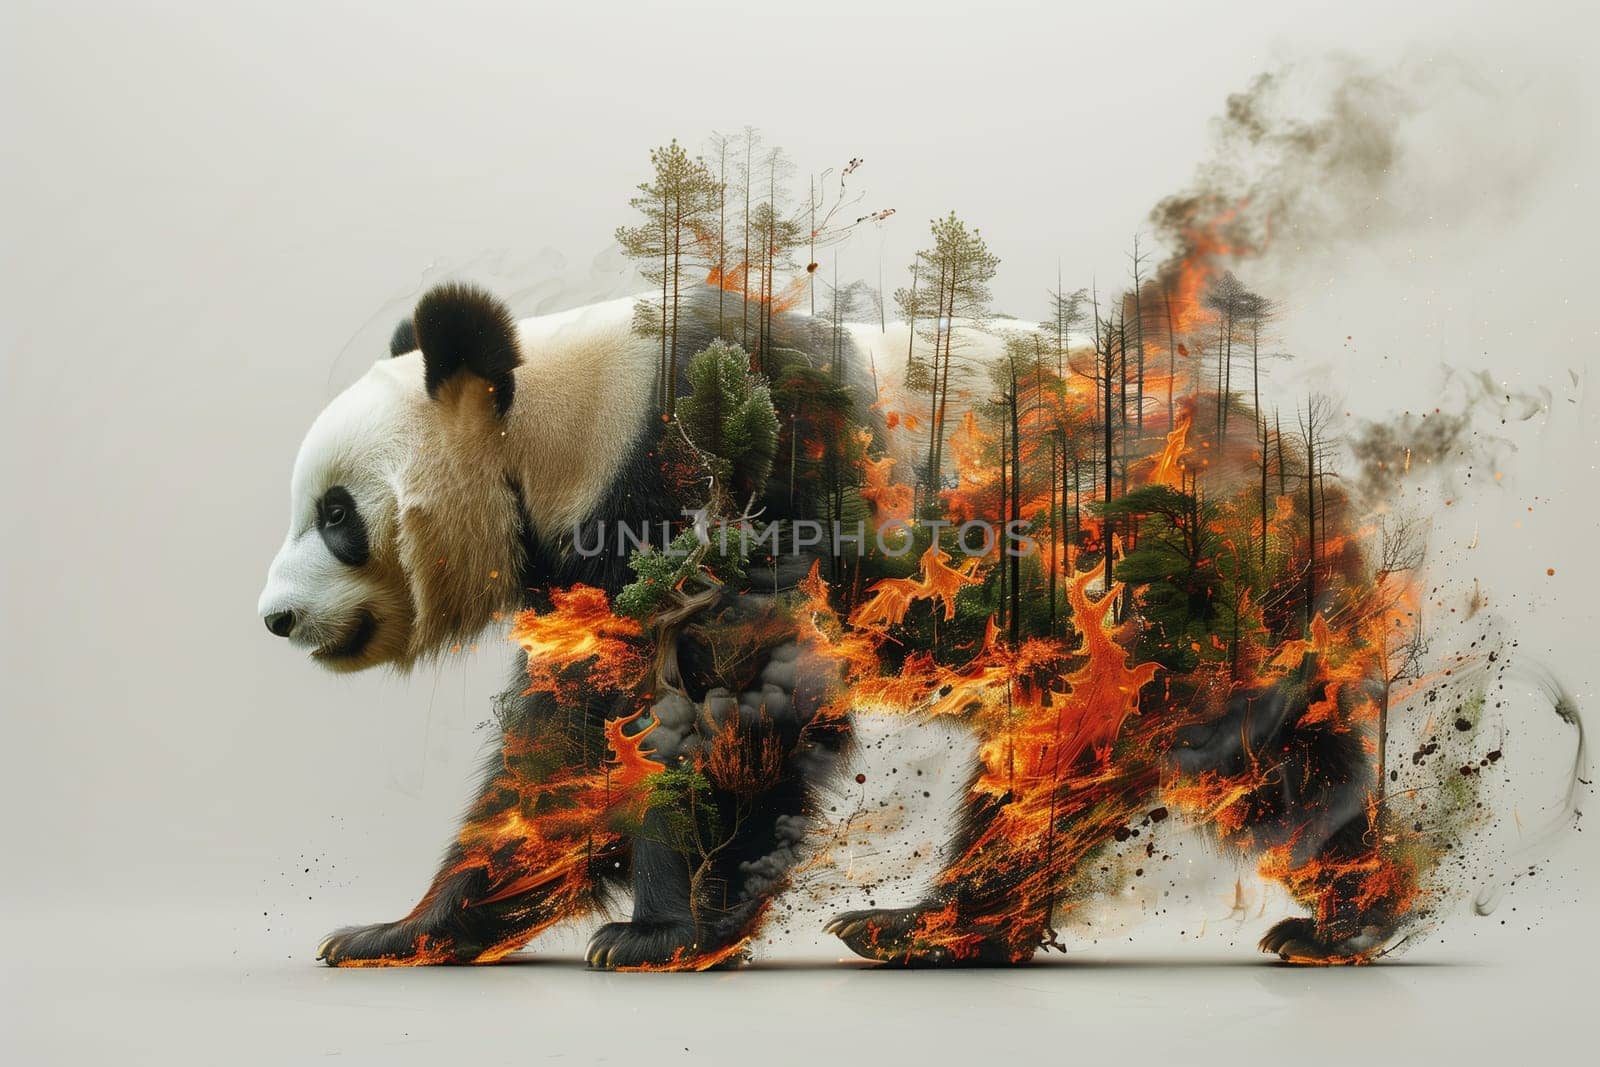 A panda bear is standing in front of a raging fire in the forest, highlighting the danger to animals and the ecosystem.